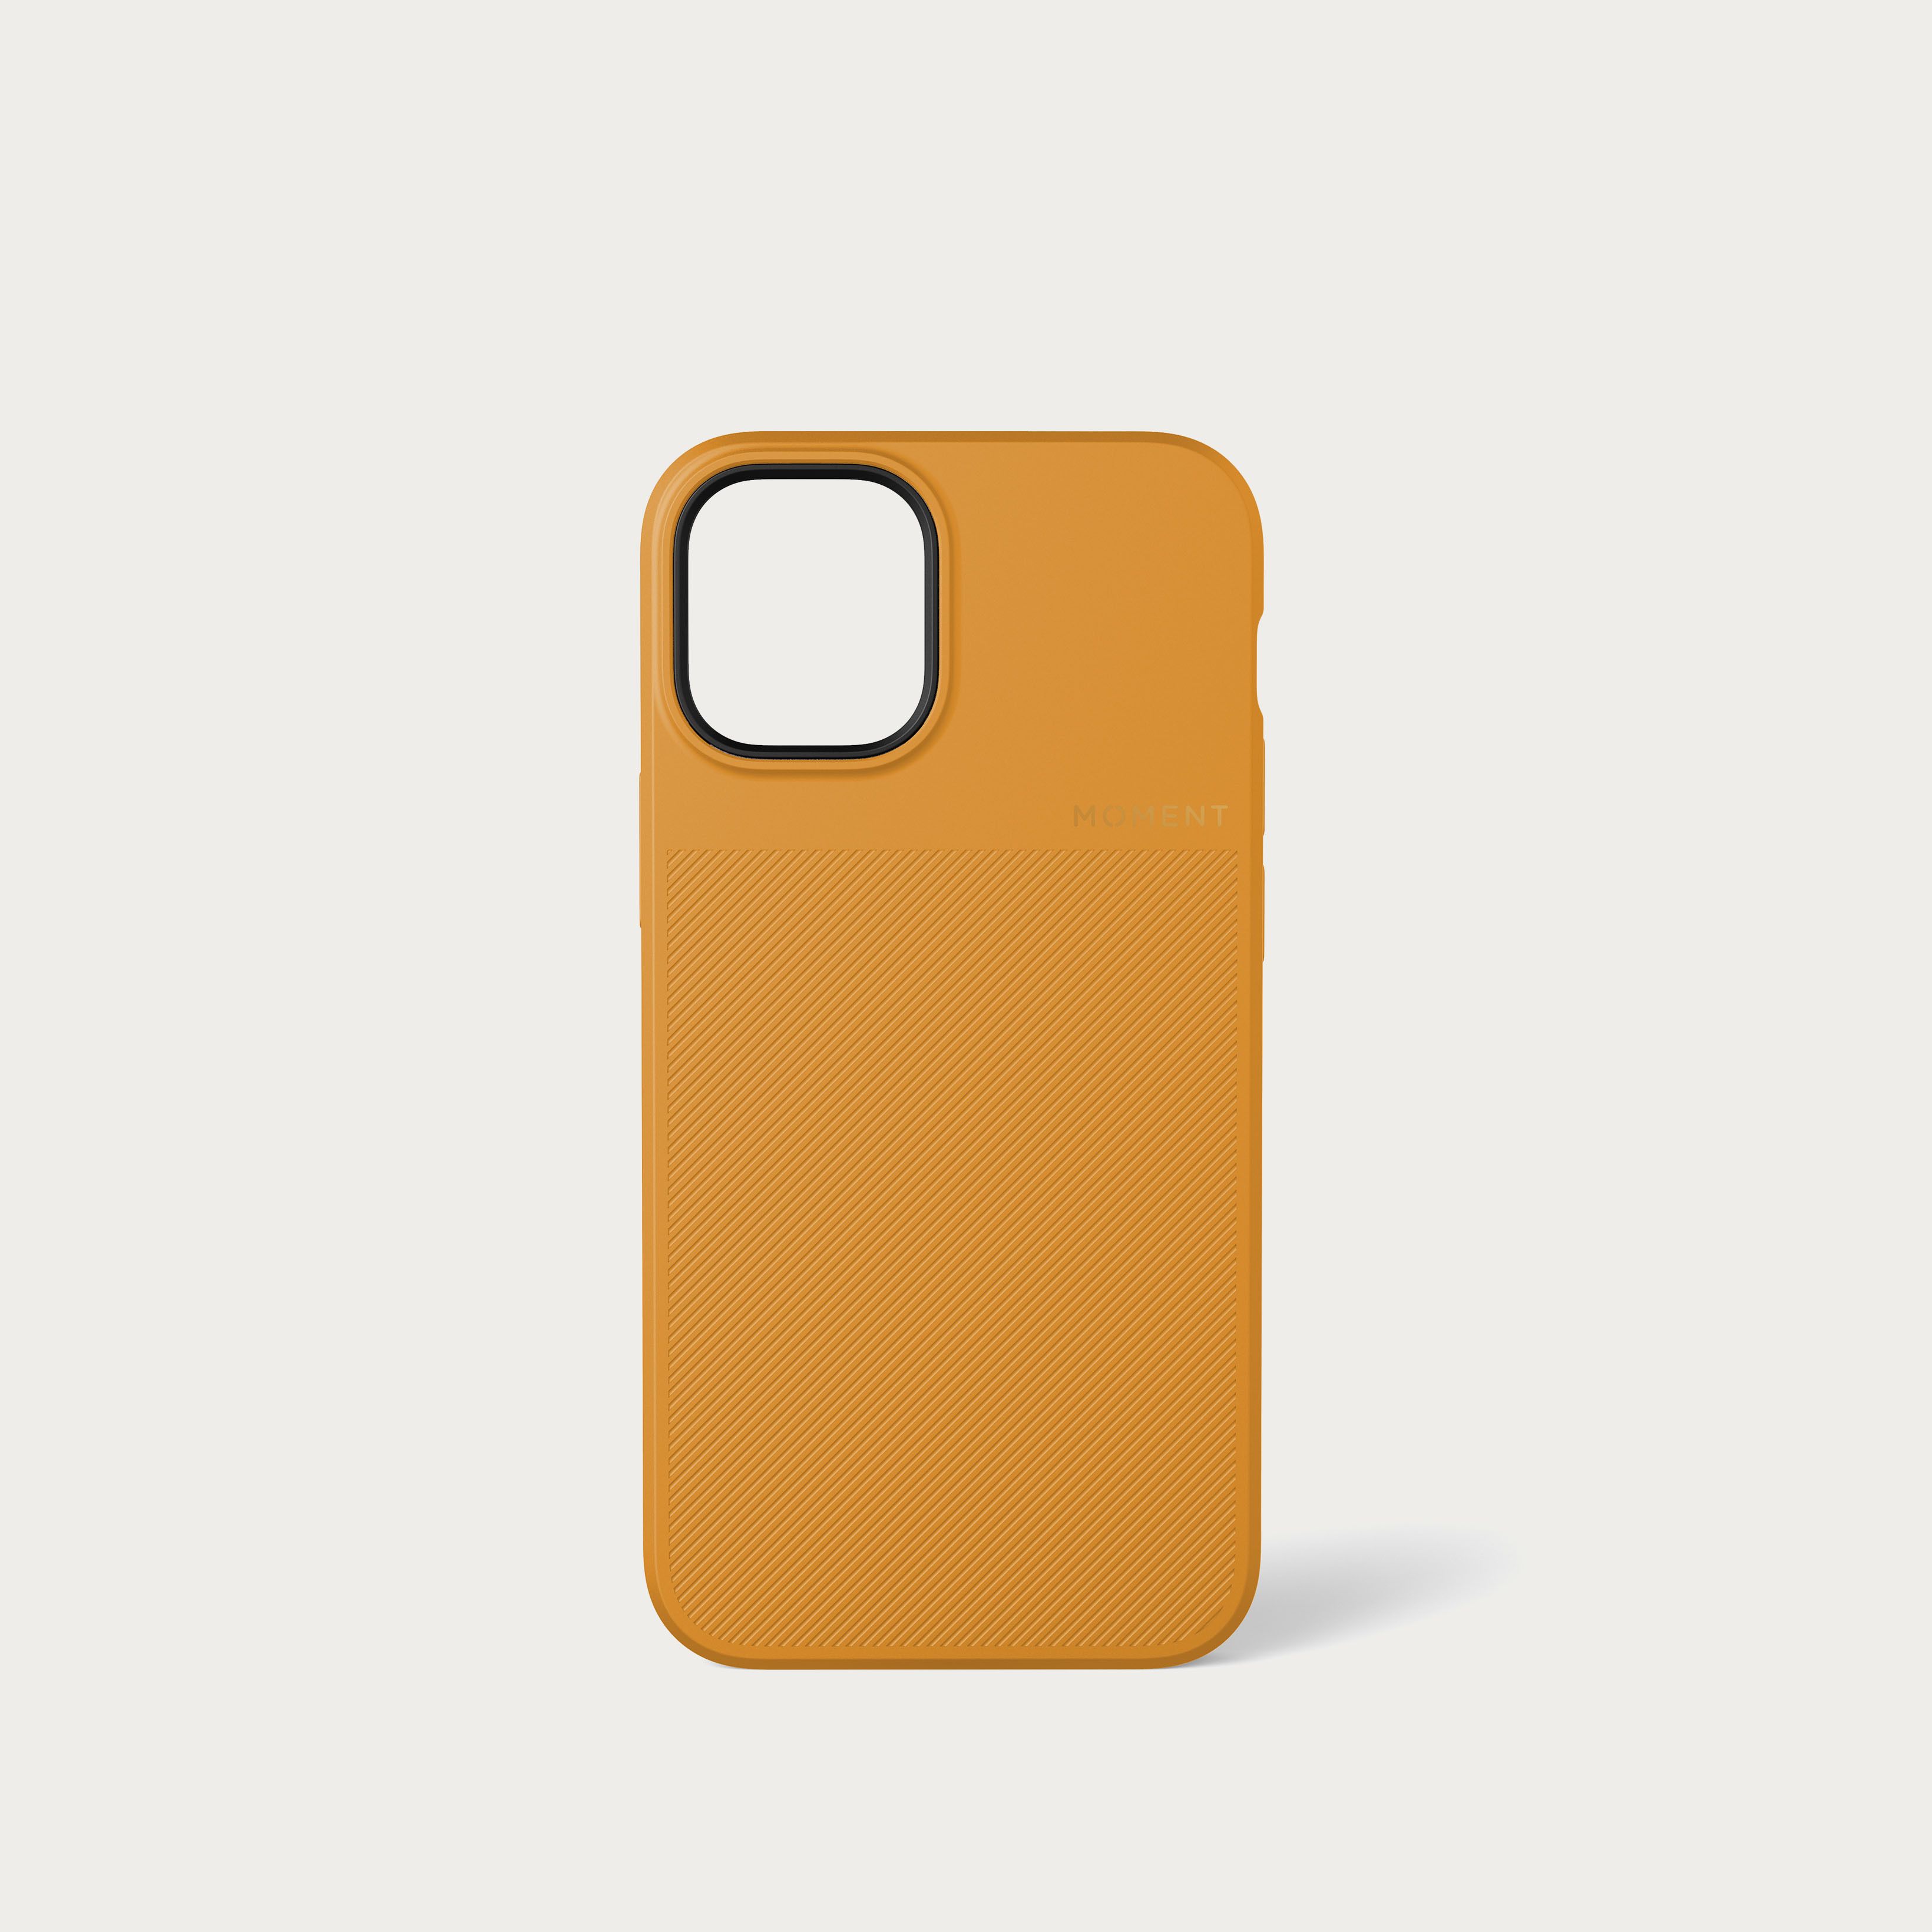 Moment Cases for iPhone 12 Series - Mustard Yellow / iPhone 12 